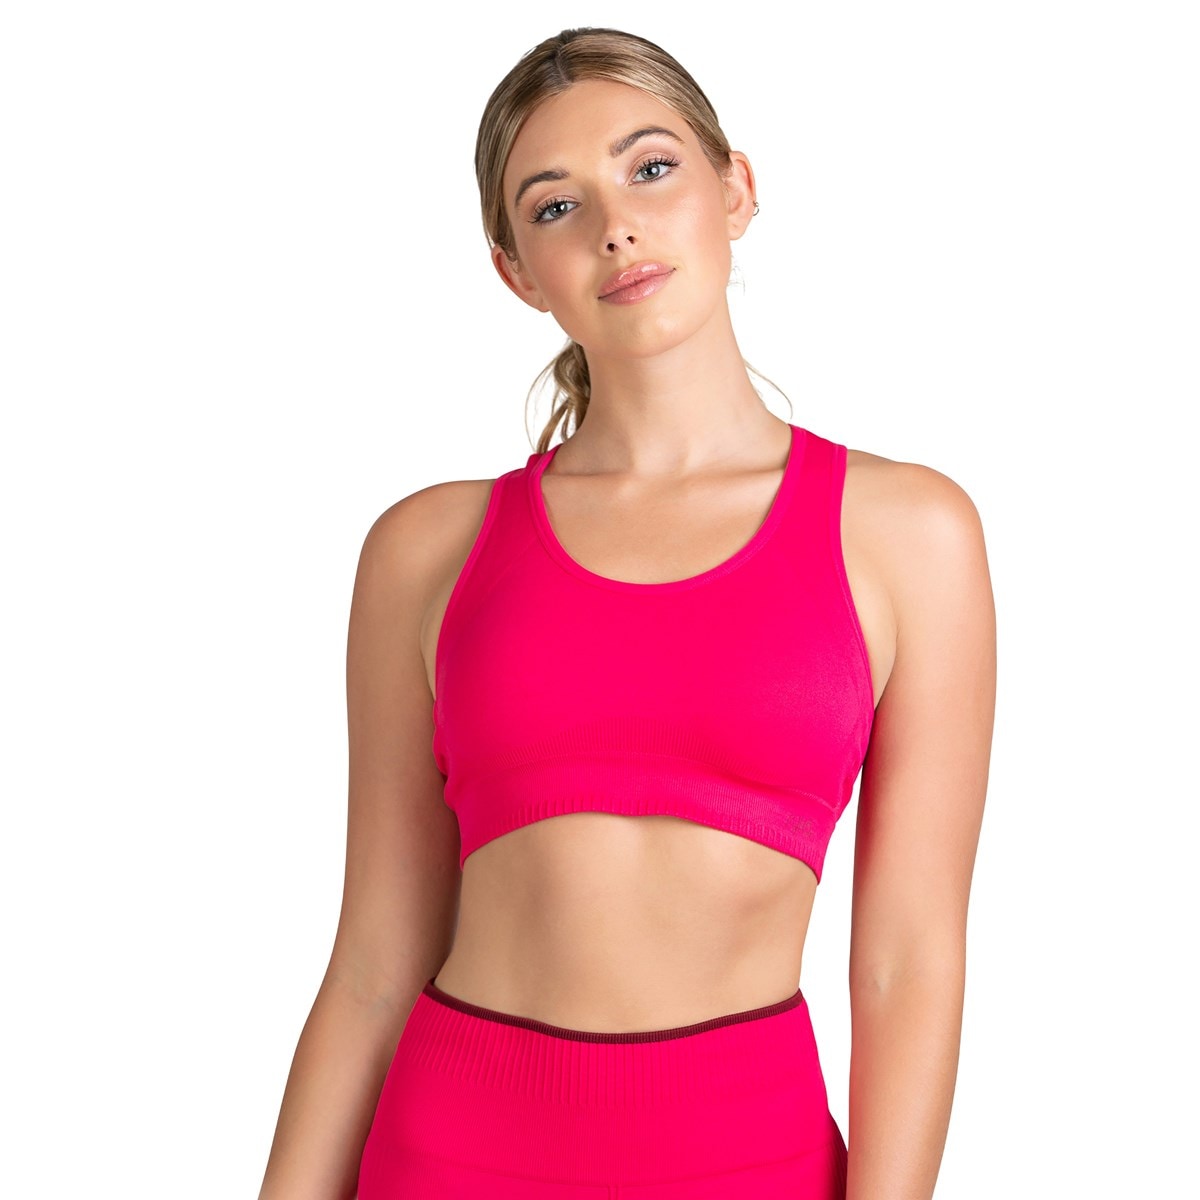 Athletic Works Support Low Impact Racerback Sports Bra (Women's